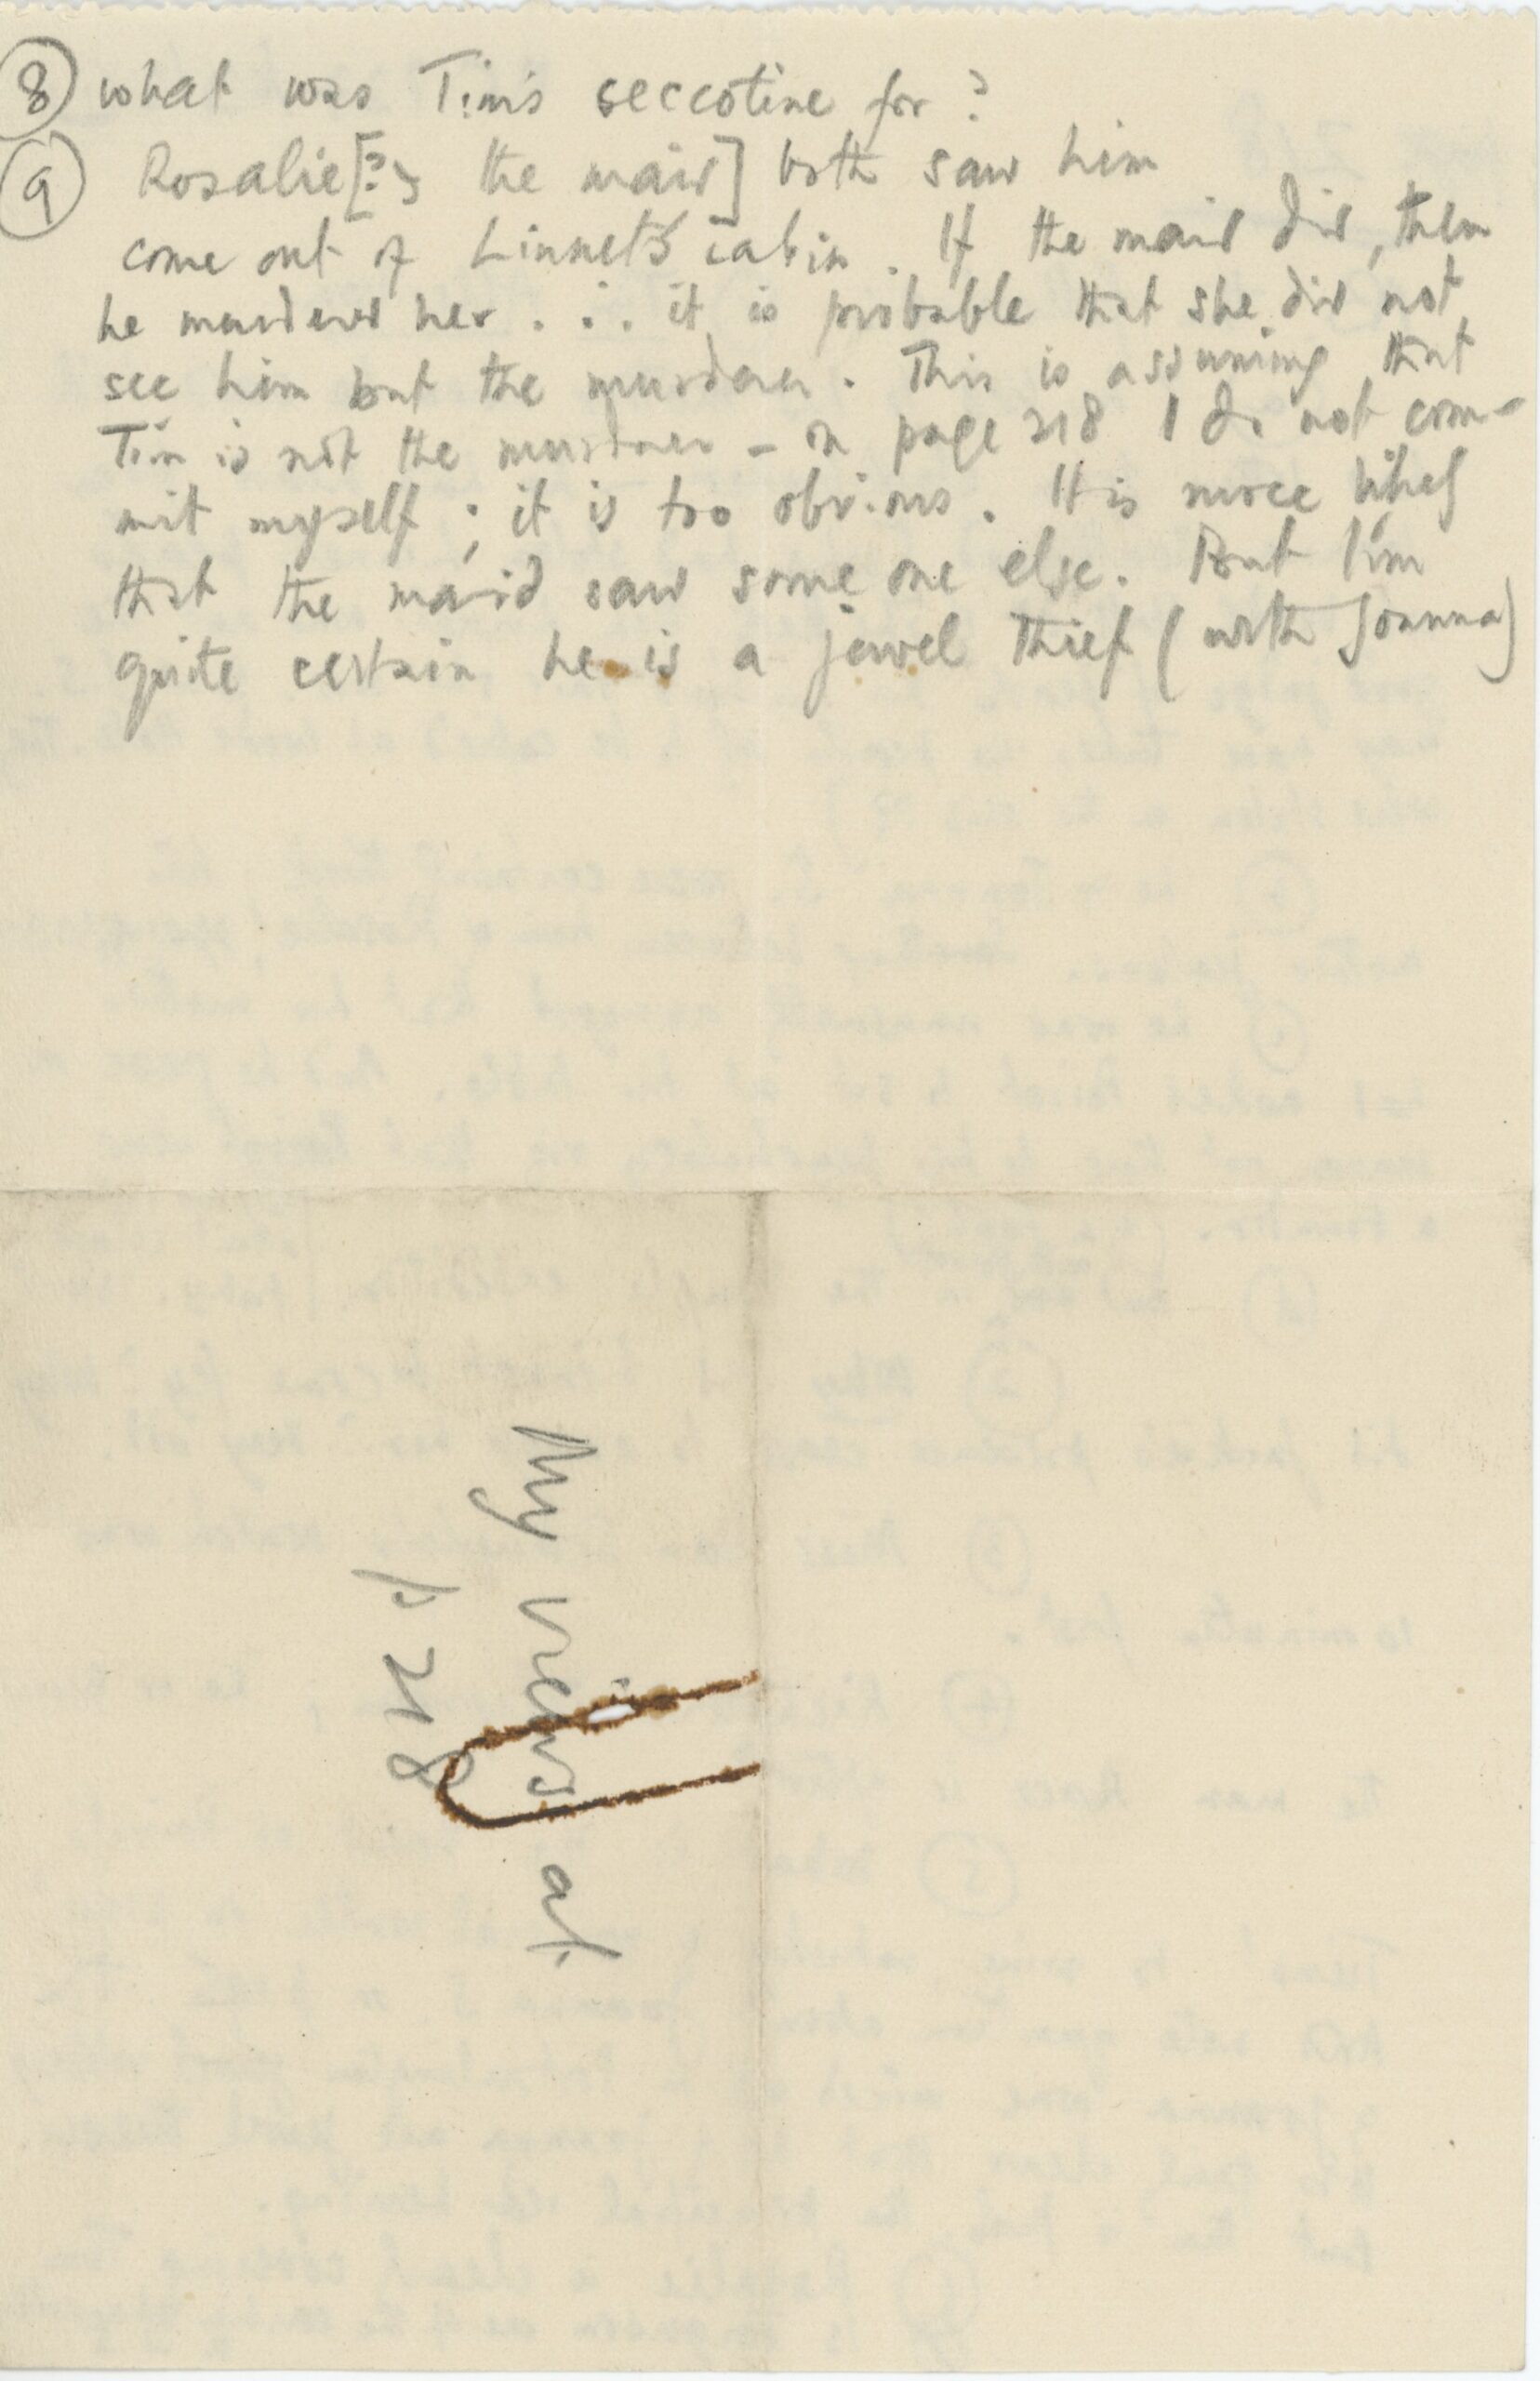 Small sheet of paper with handwritten notes in pencil. The text reads: 8) What was Tim’s Seccotine for? 9) Rosalie [? & the maid] both saw him come out of Linnet’s cabin. If the maid did, then he murders her… it is probable that she did not see him but the murderer. This is assuming that Tim is not the murderer- on page 218 I do not commit myself; it is too obvious. It is more likely that the maid saw someone else. But I’m quite certain he is a jewel thief (with Joanna).